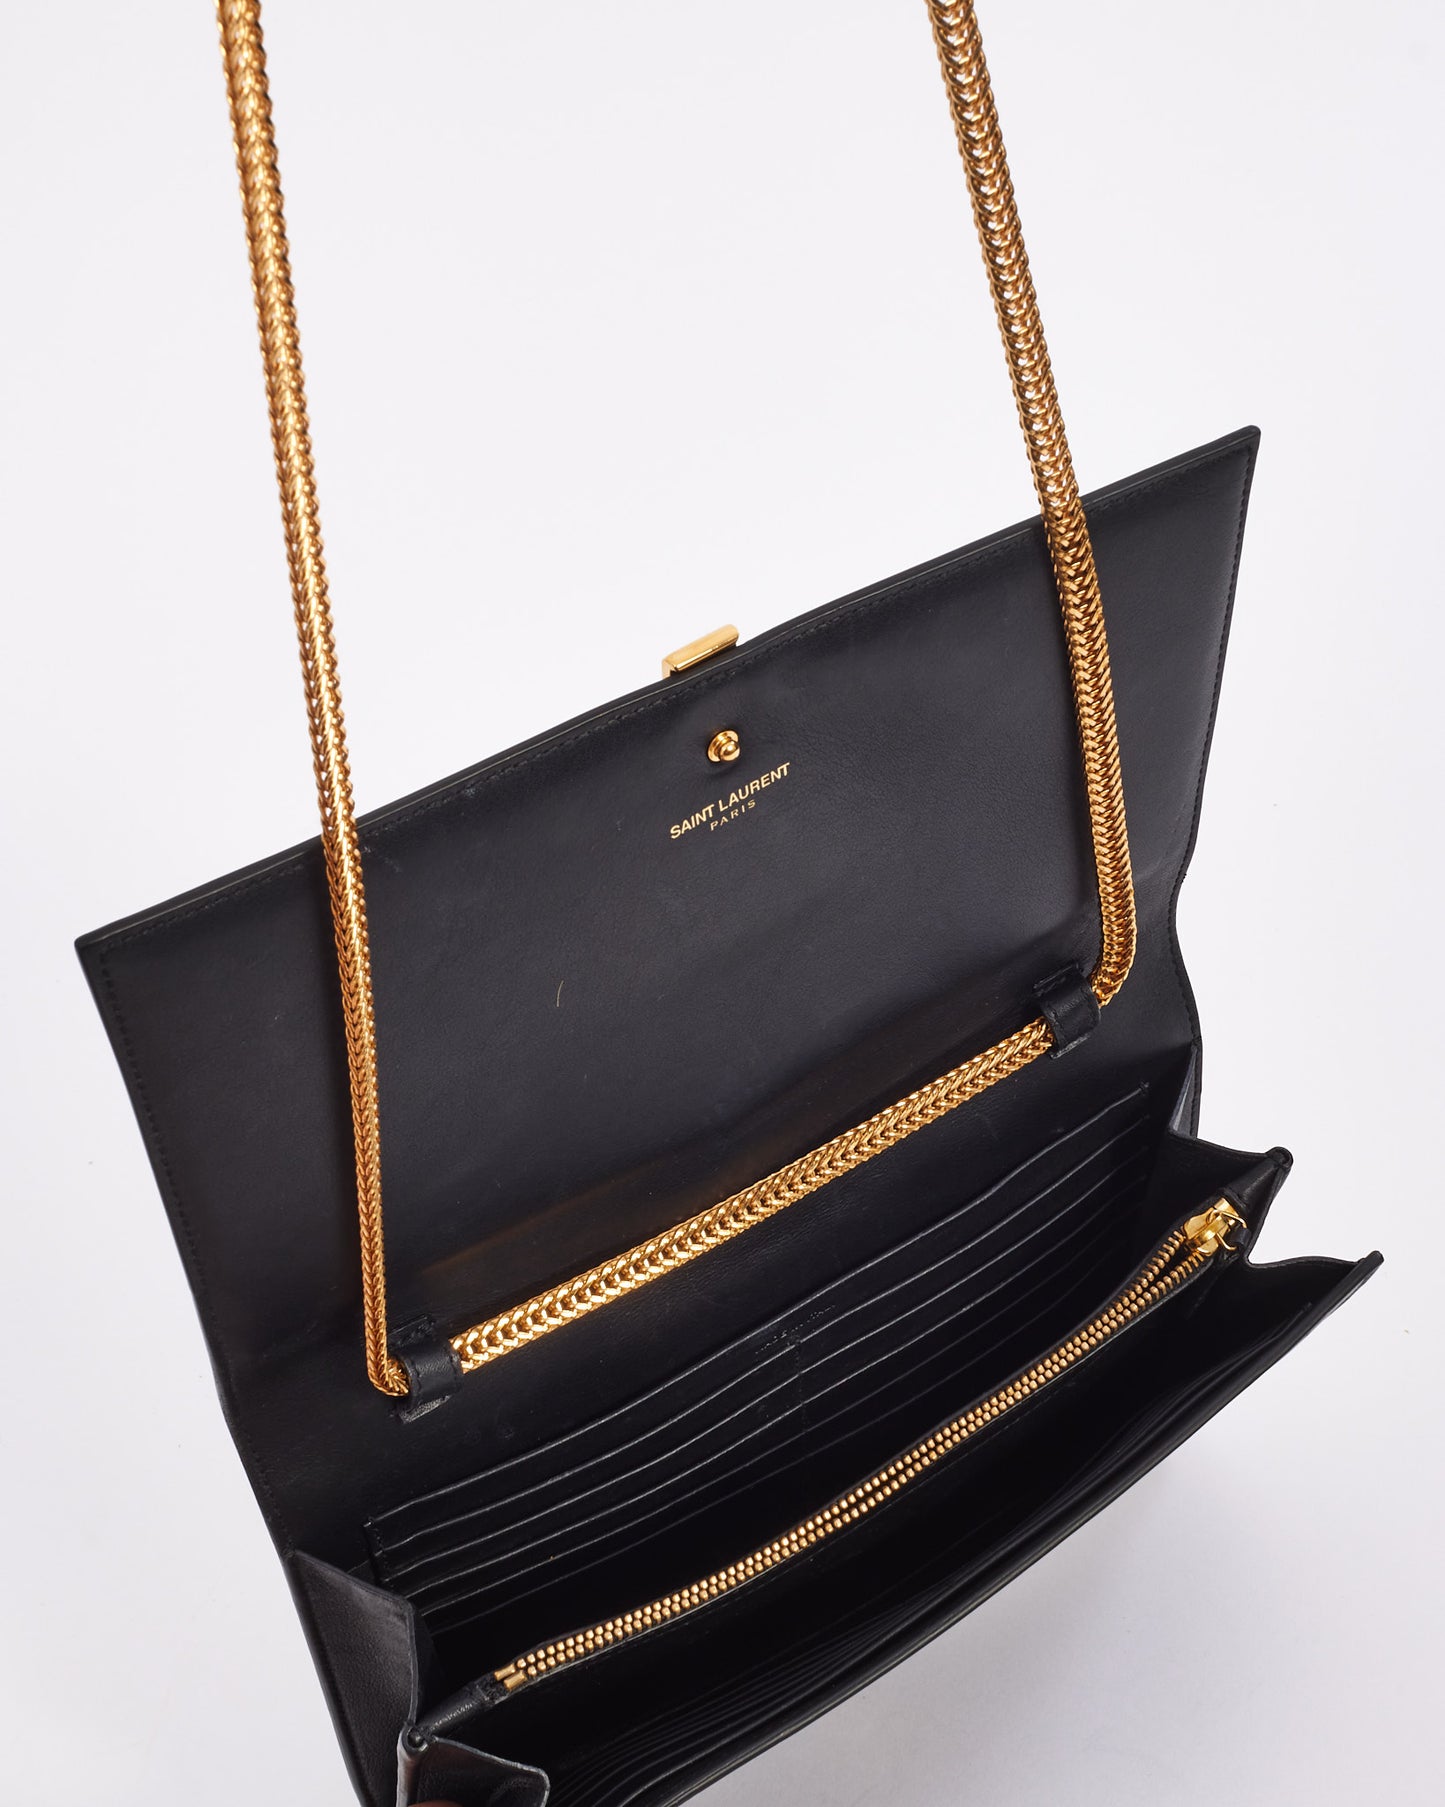 Saint Laurent Black Leather Y Chyc Clutch with Chain Strap